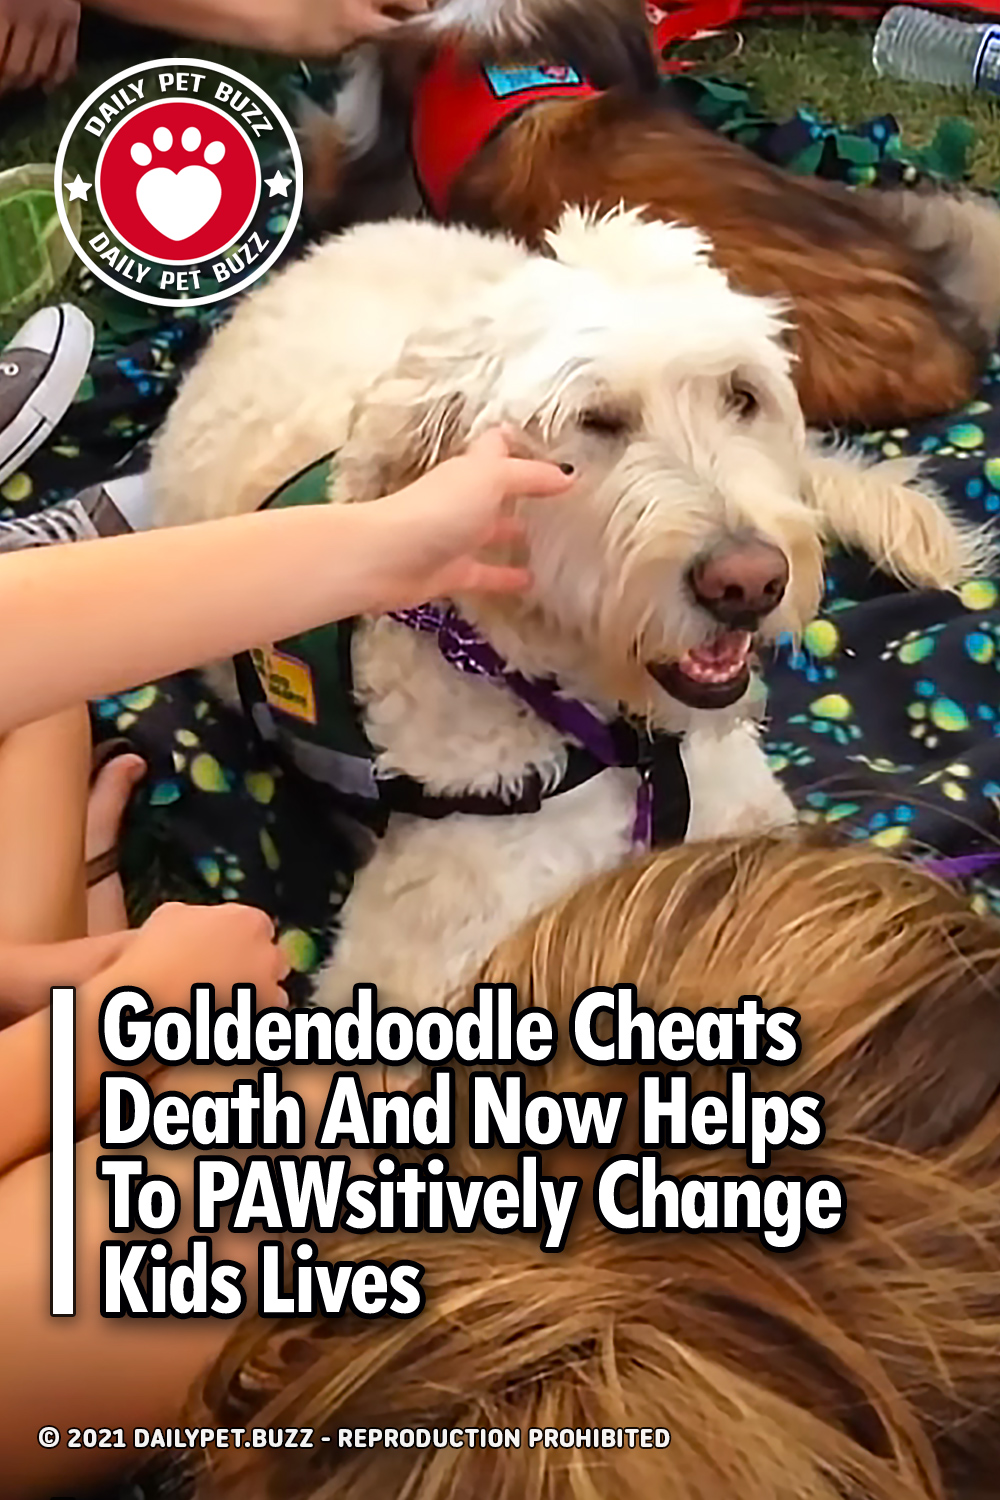 Goldendoodle Cheats Death And Now Helps To PAWsitively Change Kids Lives